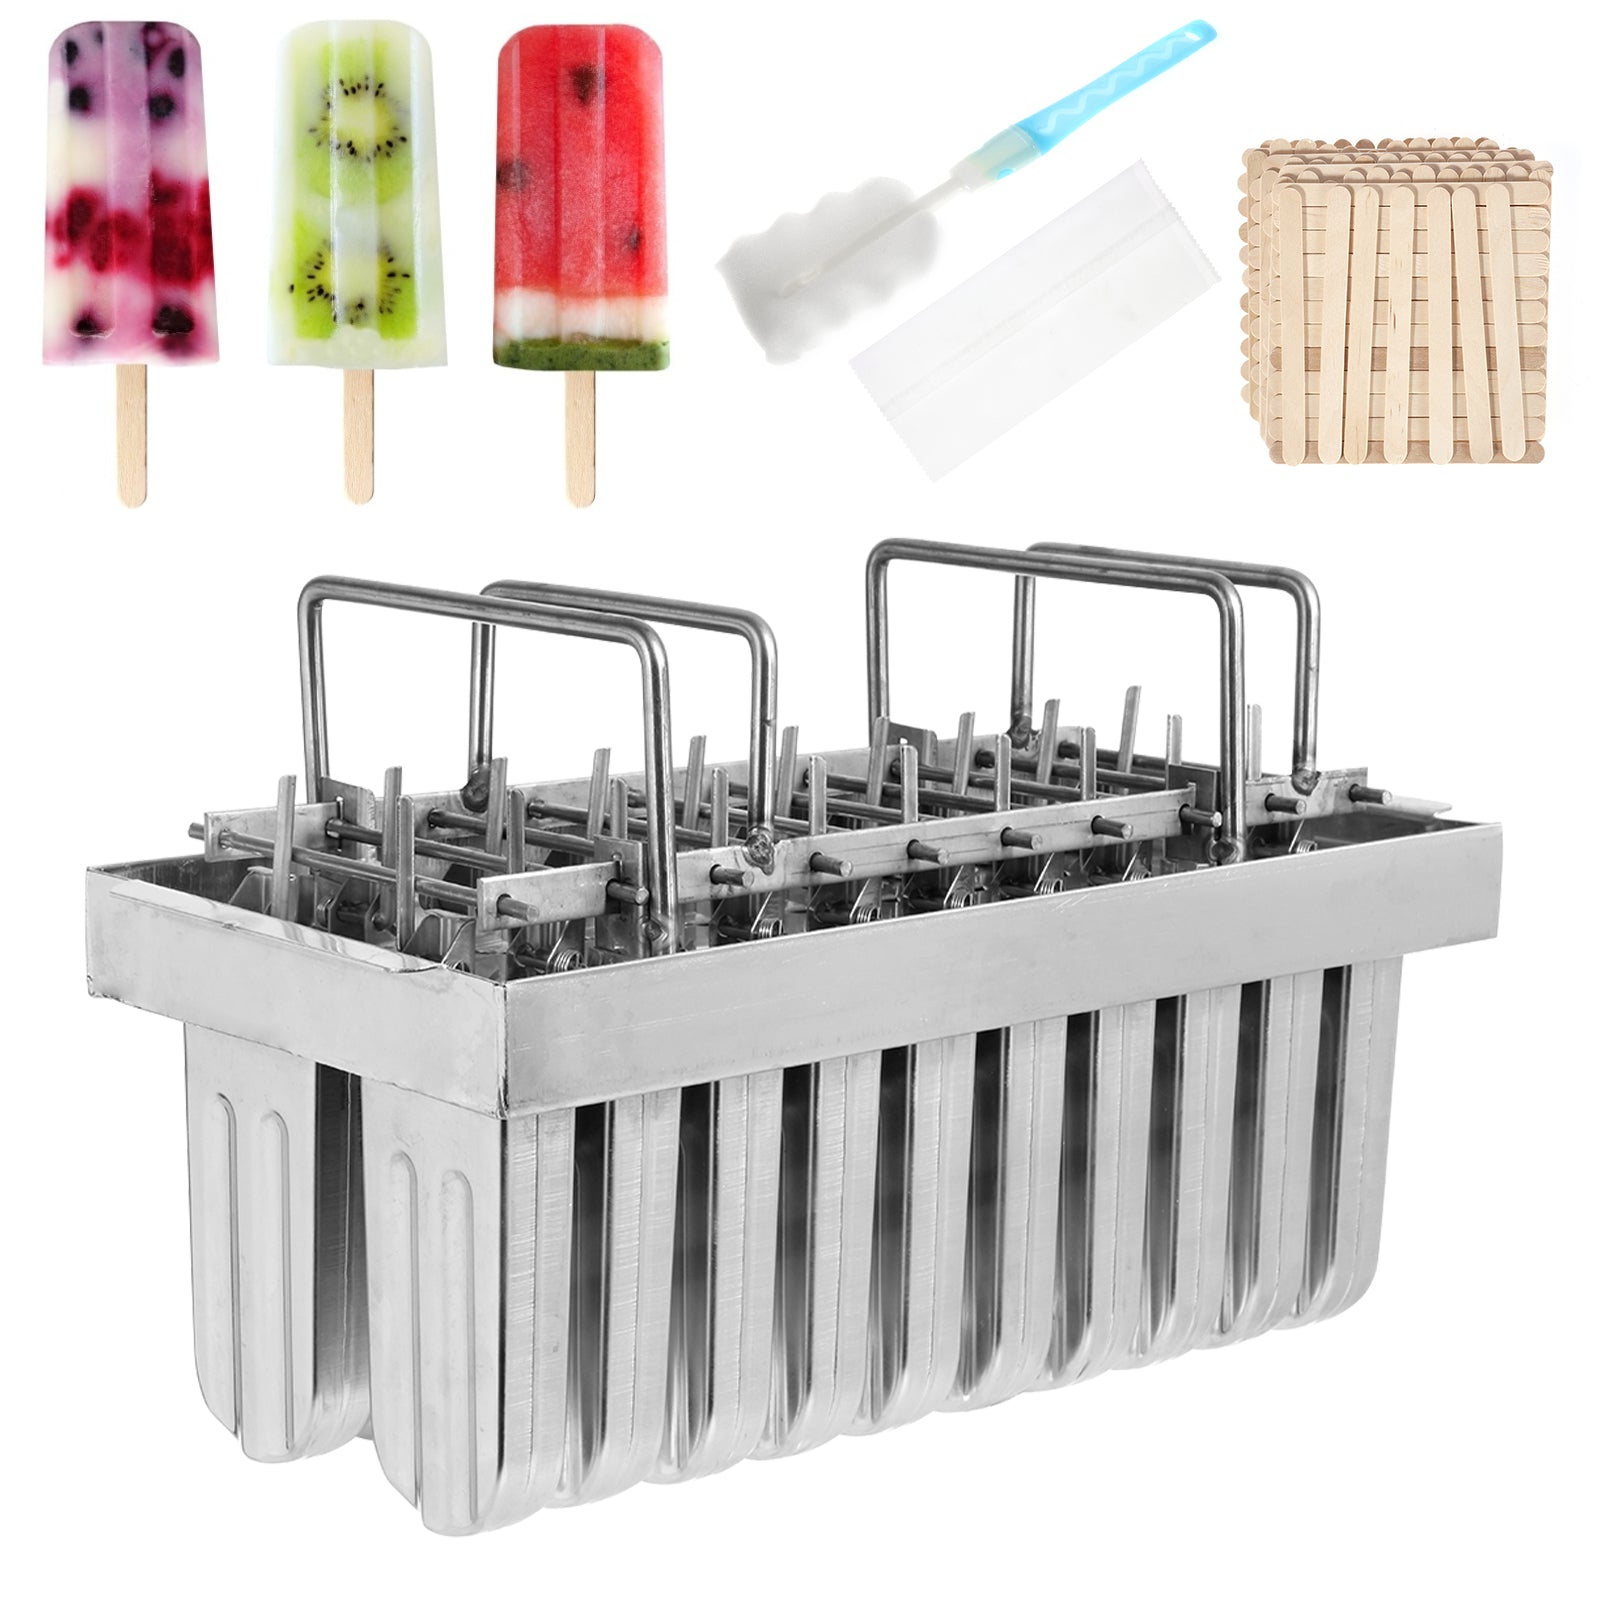 WICHEMI Stainless Steel Popsicle Molds Commercial Ice Pop Molds 20PCS  2-IN-1 Metal Ice Lolly Popsicle Mould Ice Cream Maker Mold Stick Holder  with Lid